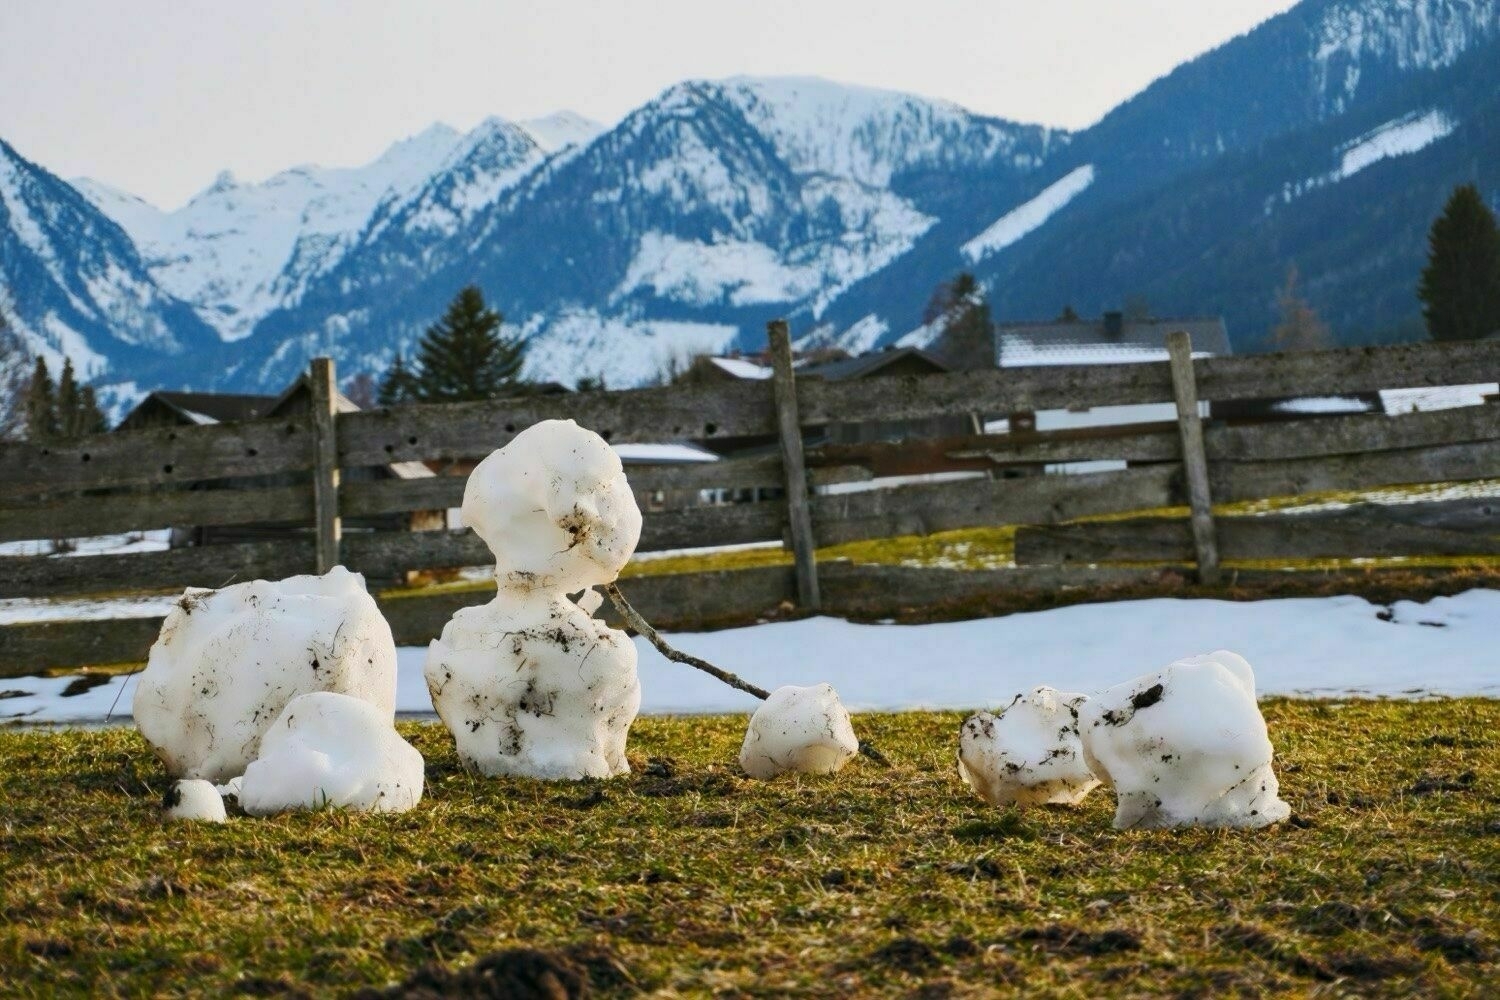 Small partly melted snowman on a green fields with some sopots of snow. Mountains are visible in the background.